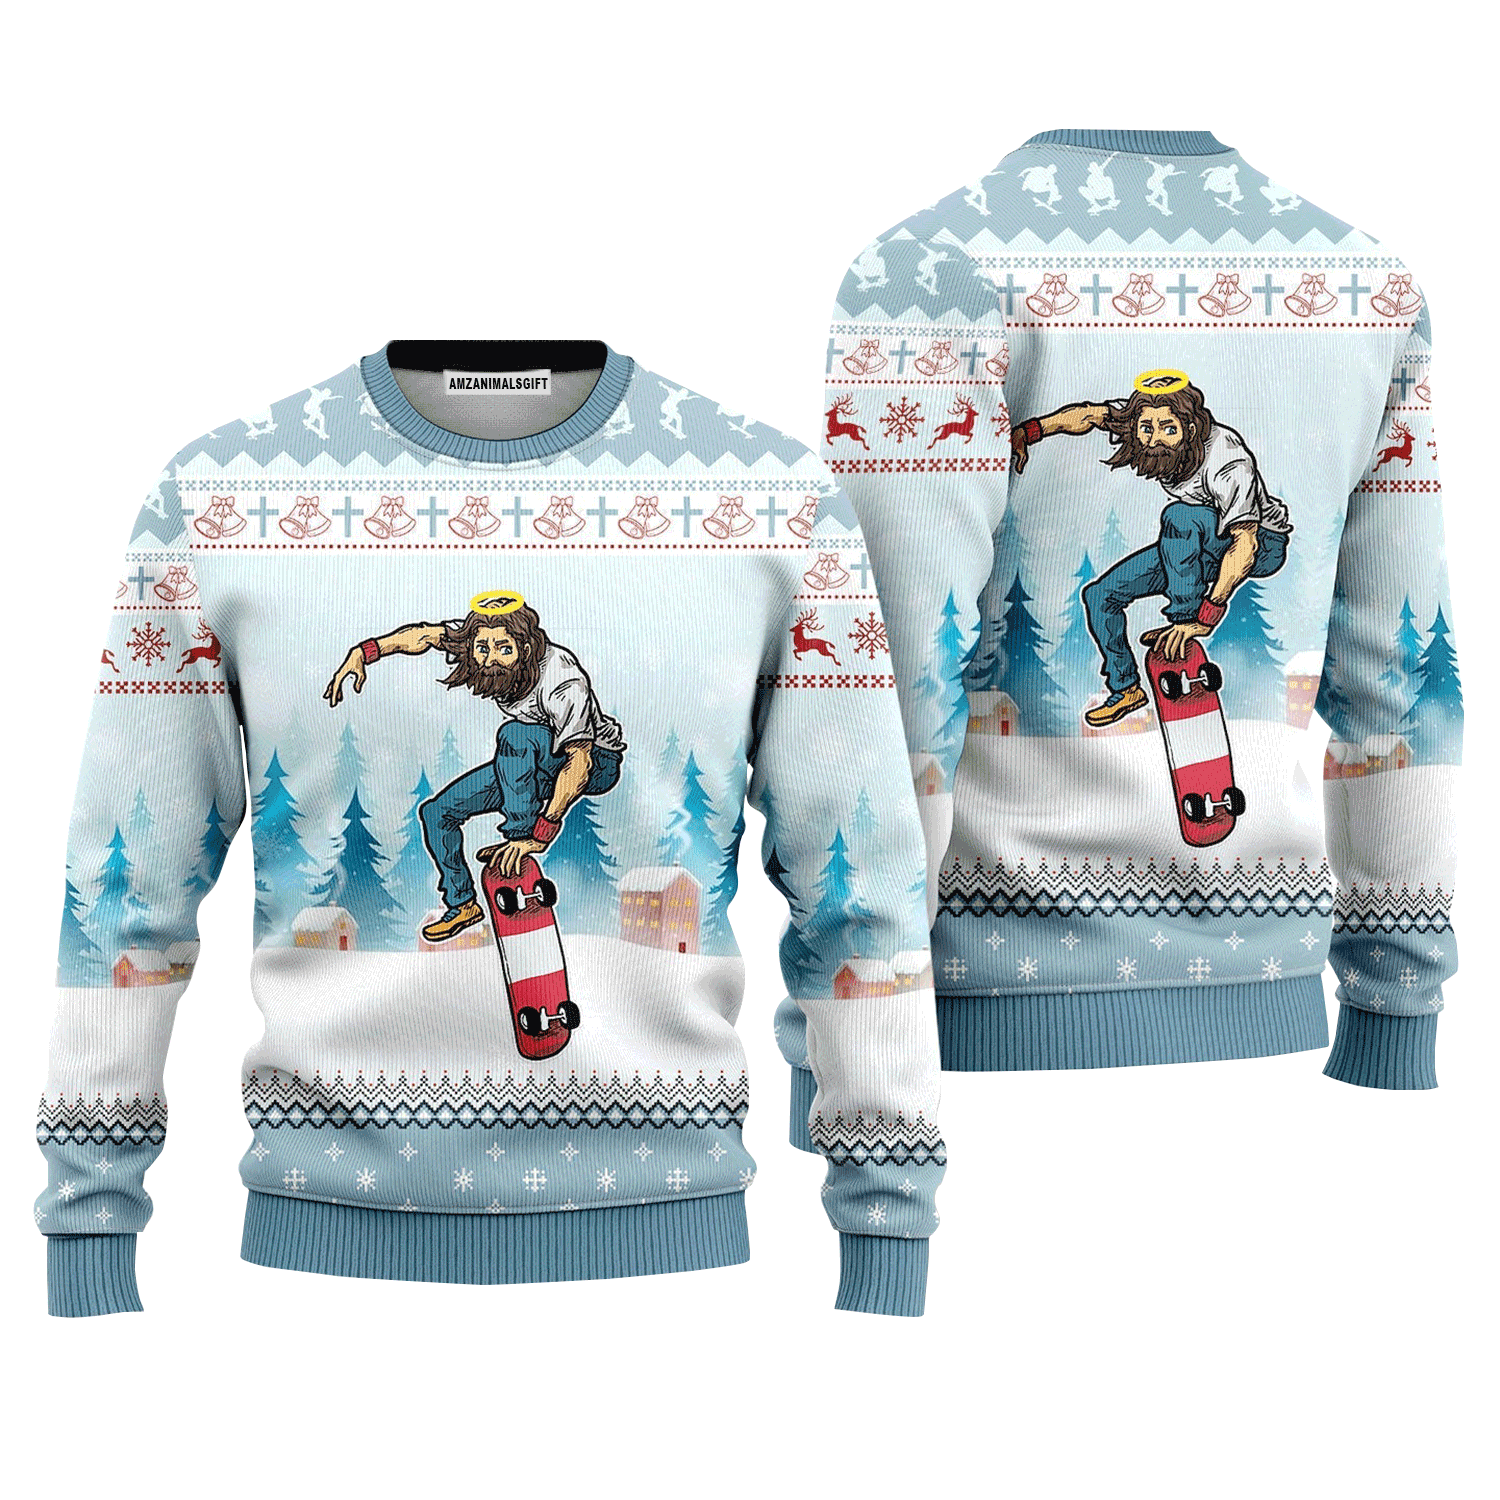 Funny Jesus Skateboarding Christmas Sweater, Ugly Sweater For Men & Women, Perfect Outfit For Christmas New Year Autumn Winter